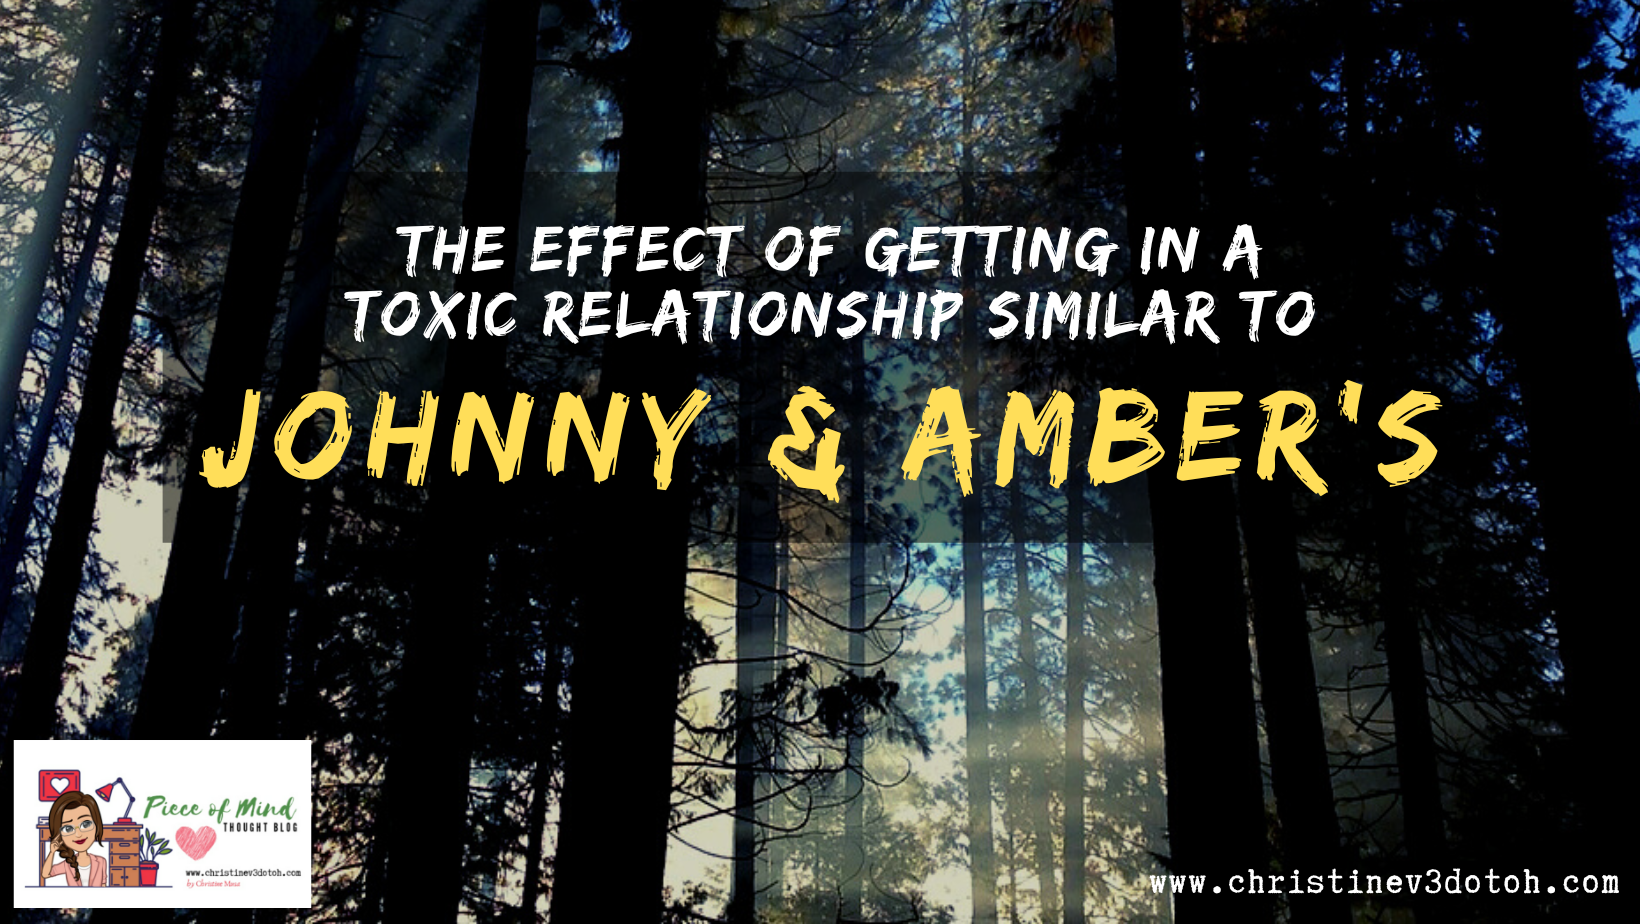 The Effect of Getting in a Toxic Relationship Like What Johnny Depp and Amber Heard Had